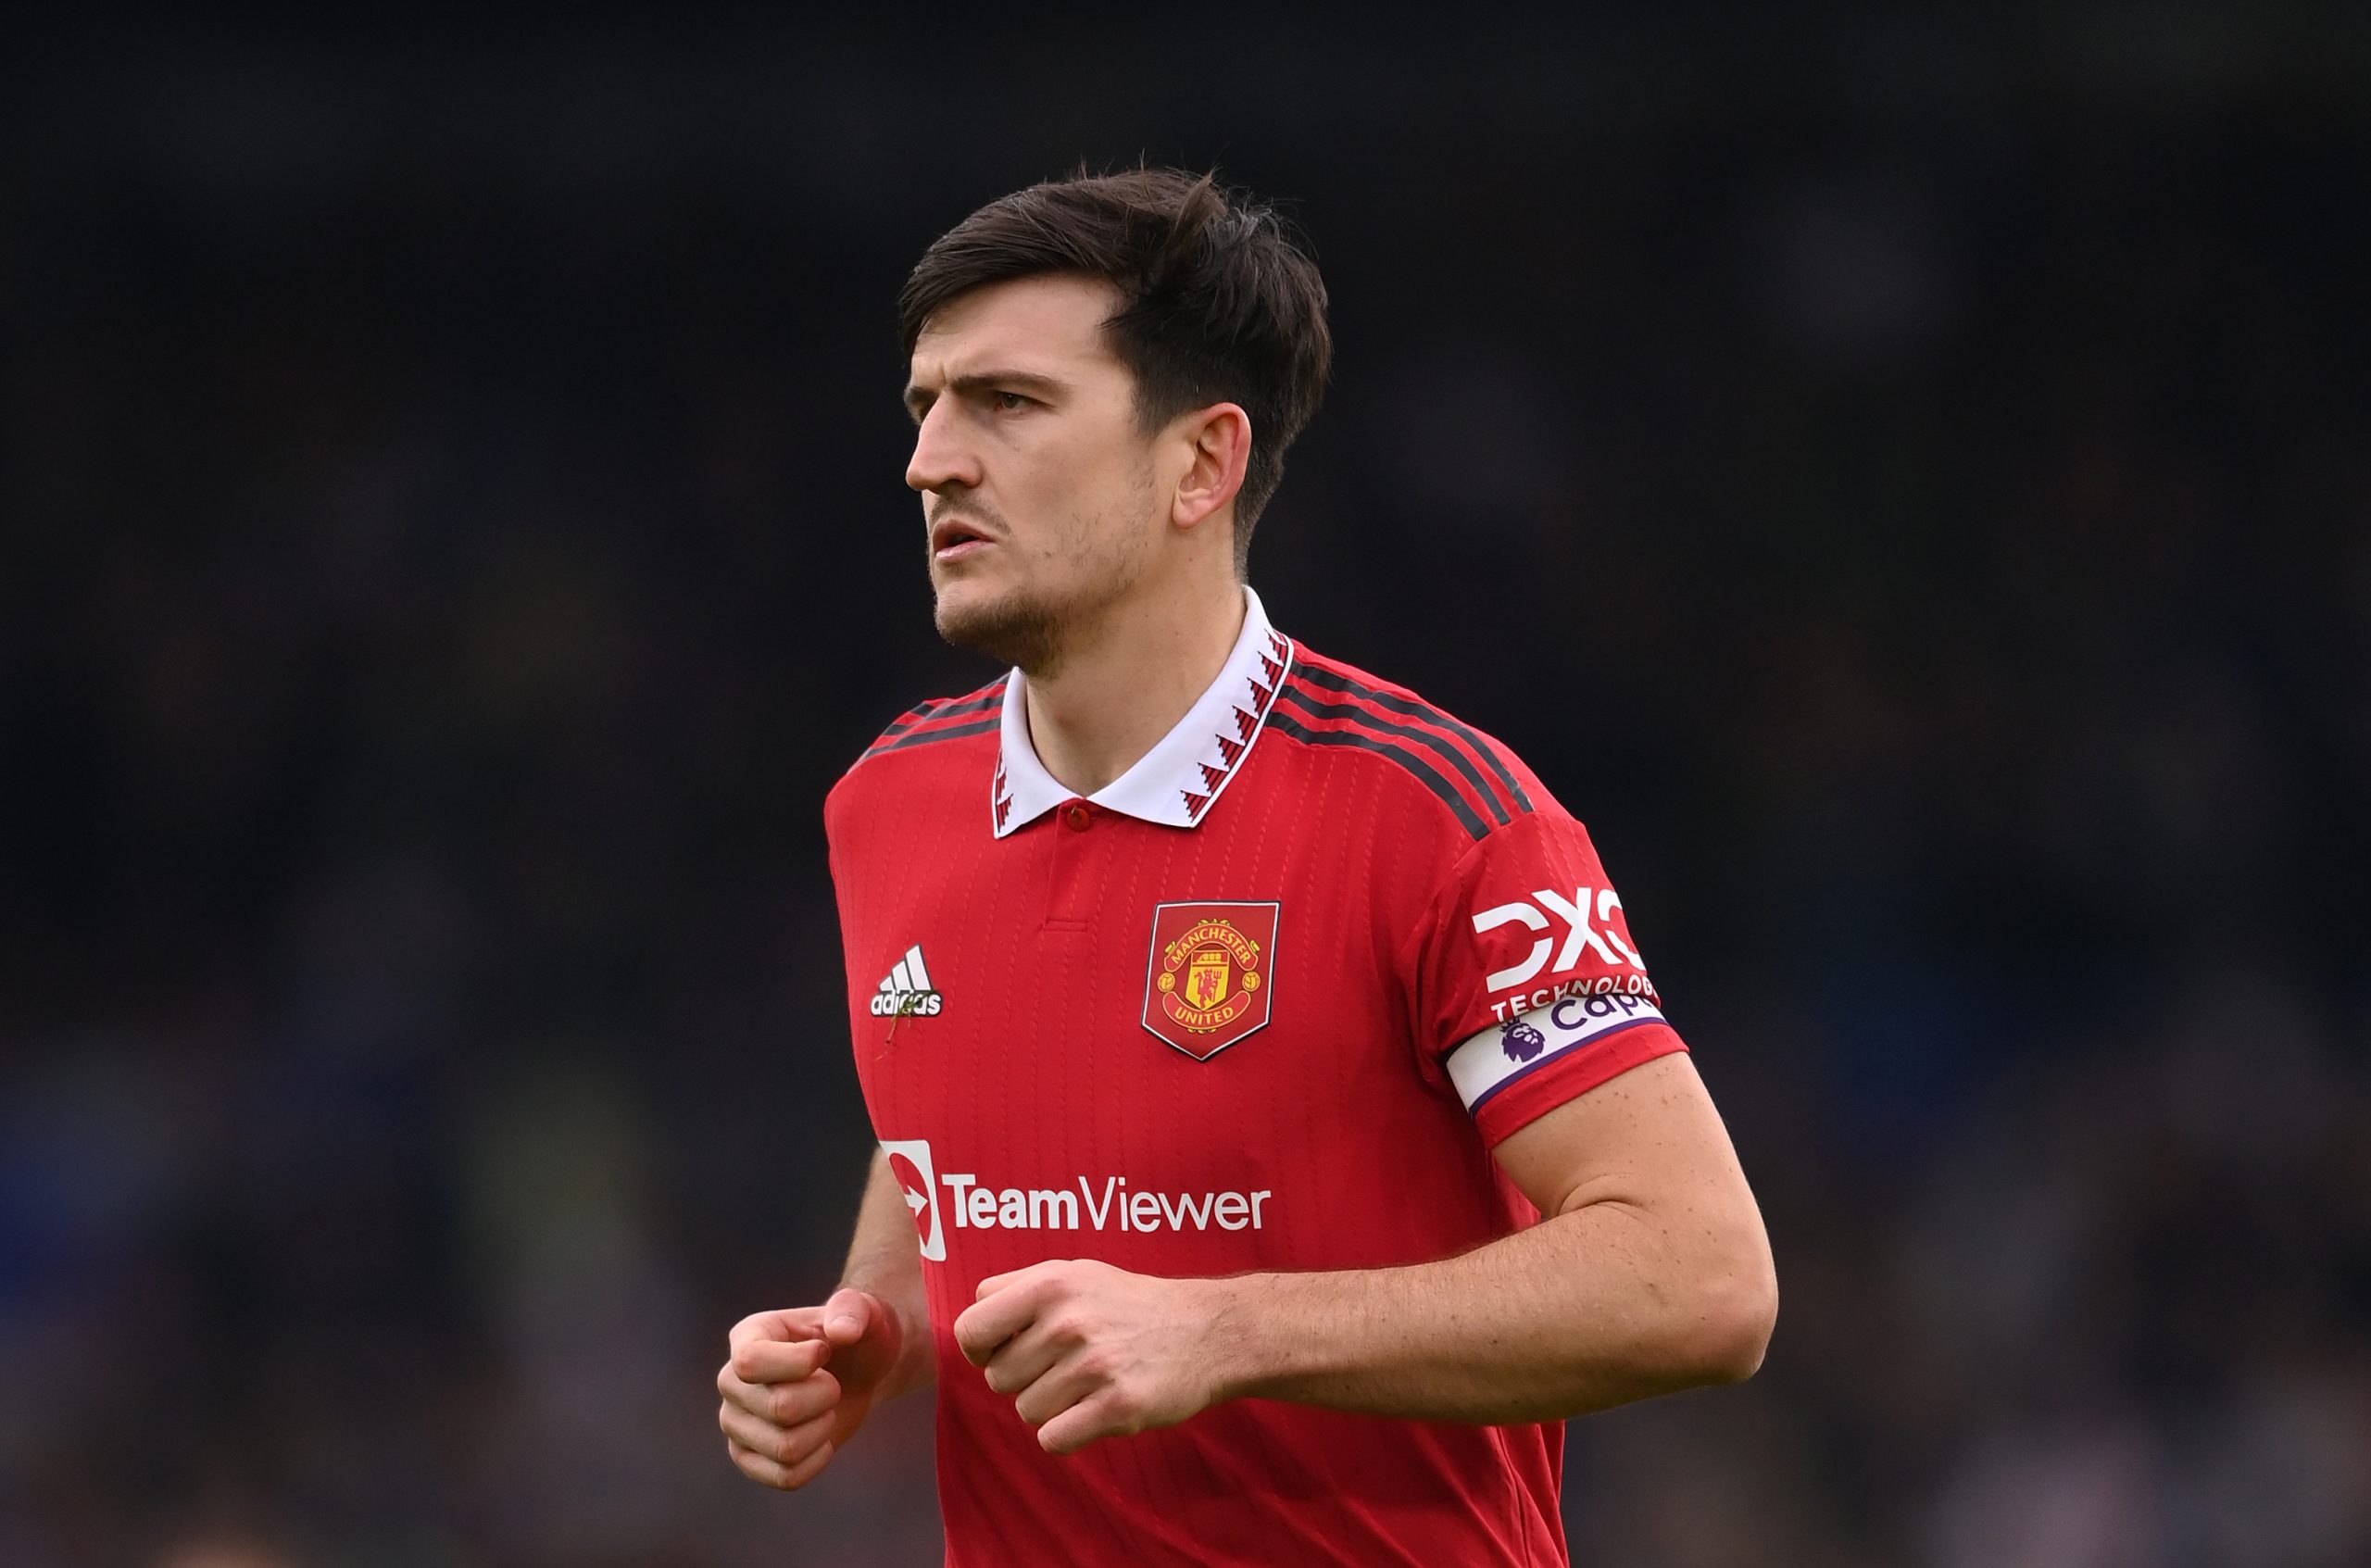 Manchester United 'resigned' to losing money on former Leicester City defender Harry Maguire.